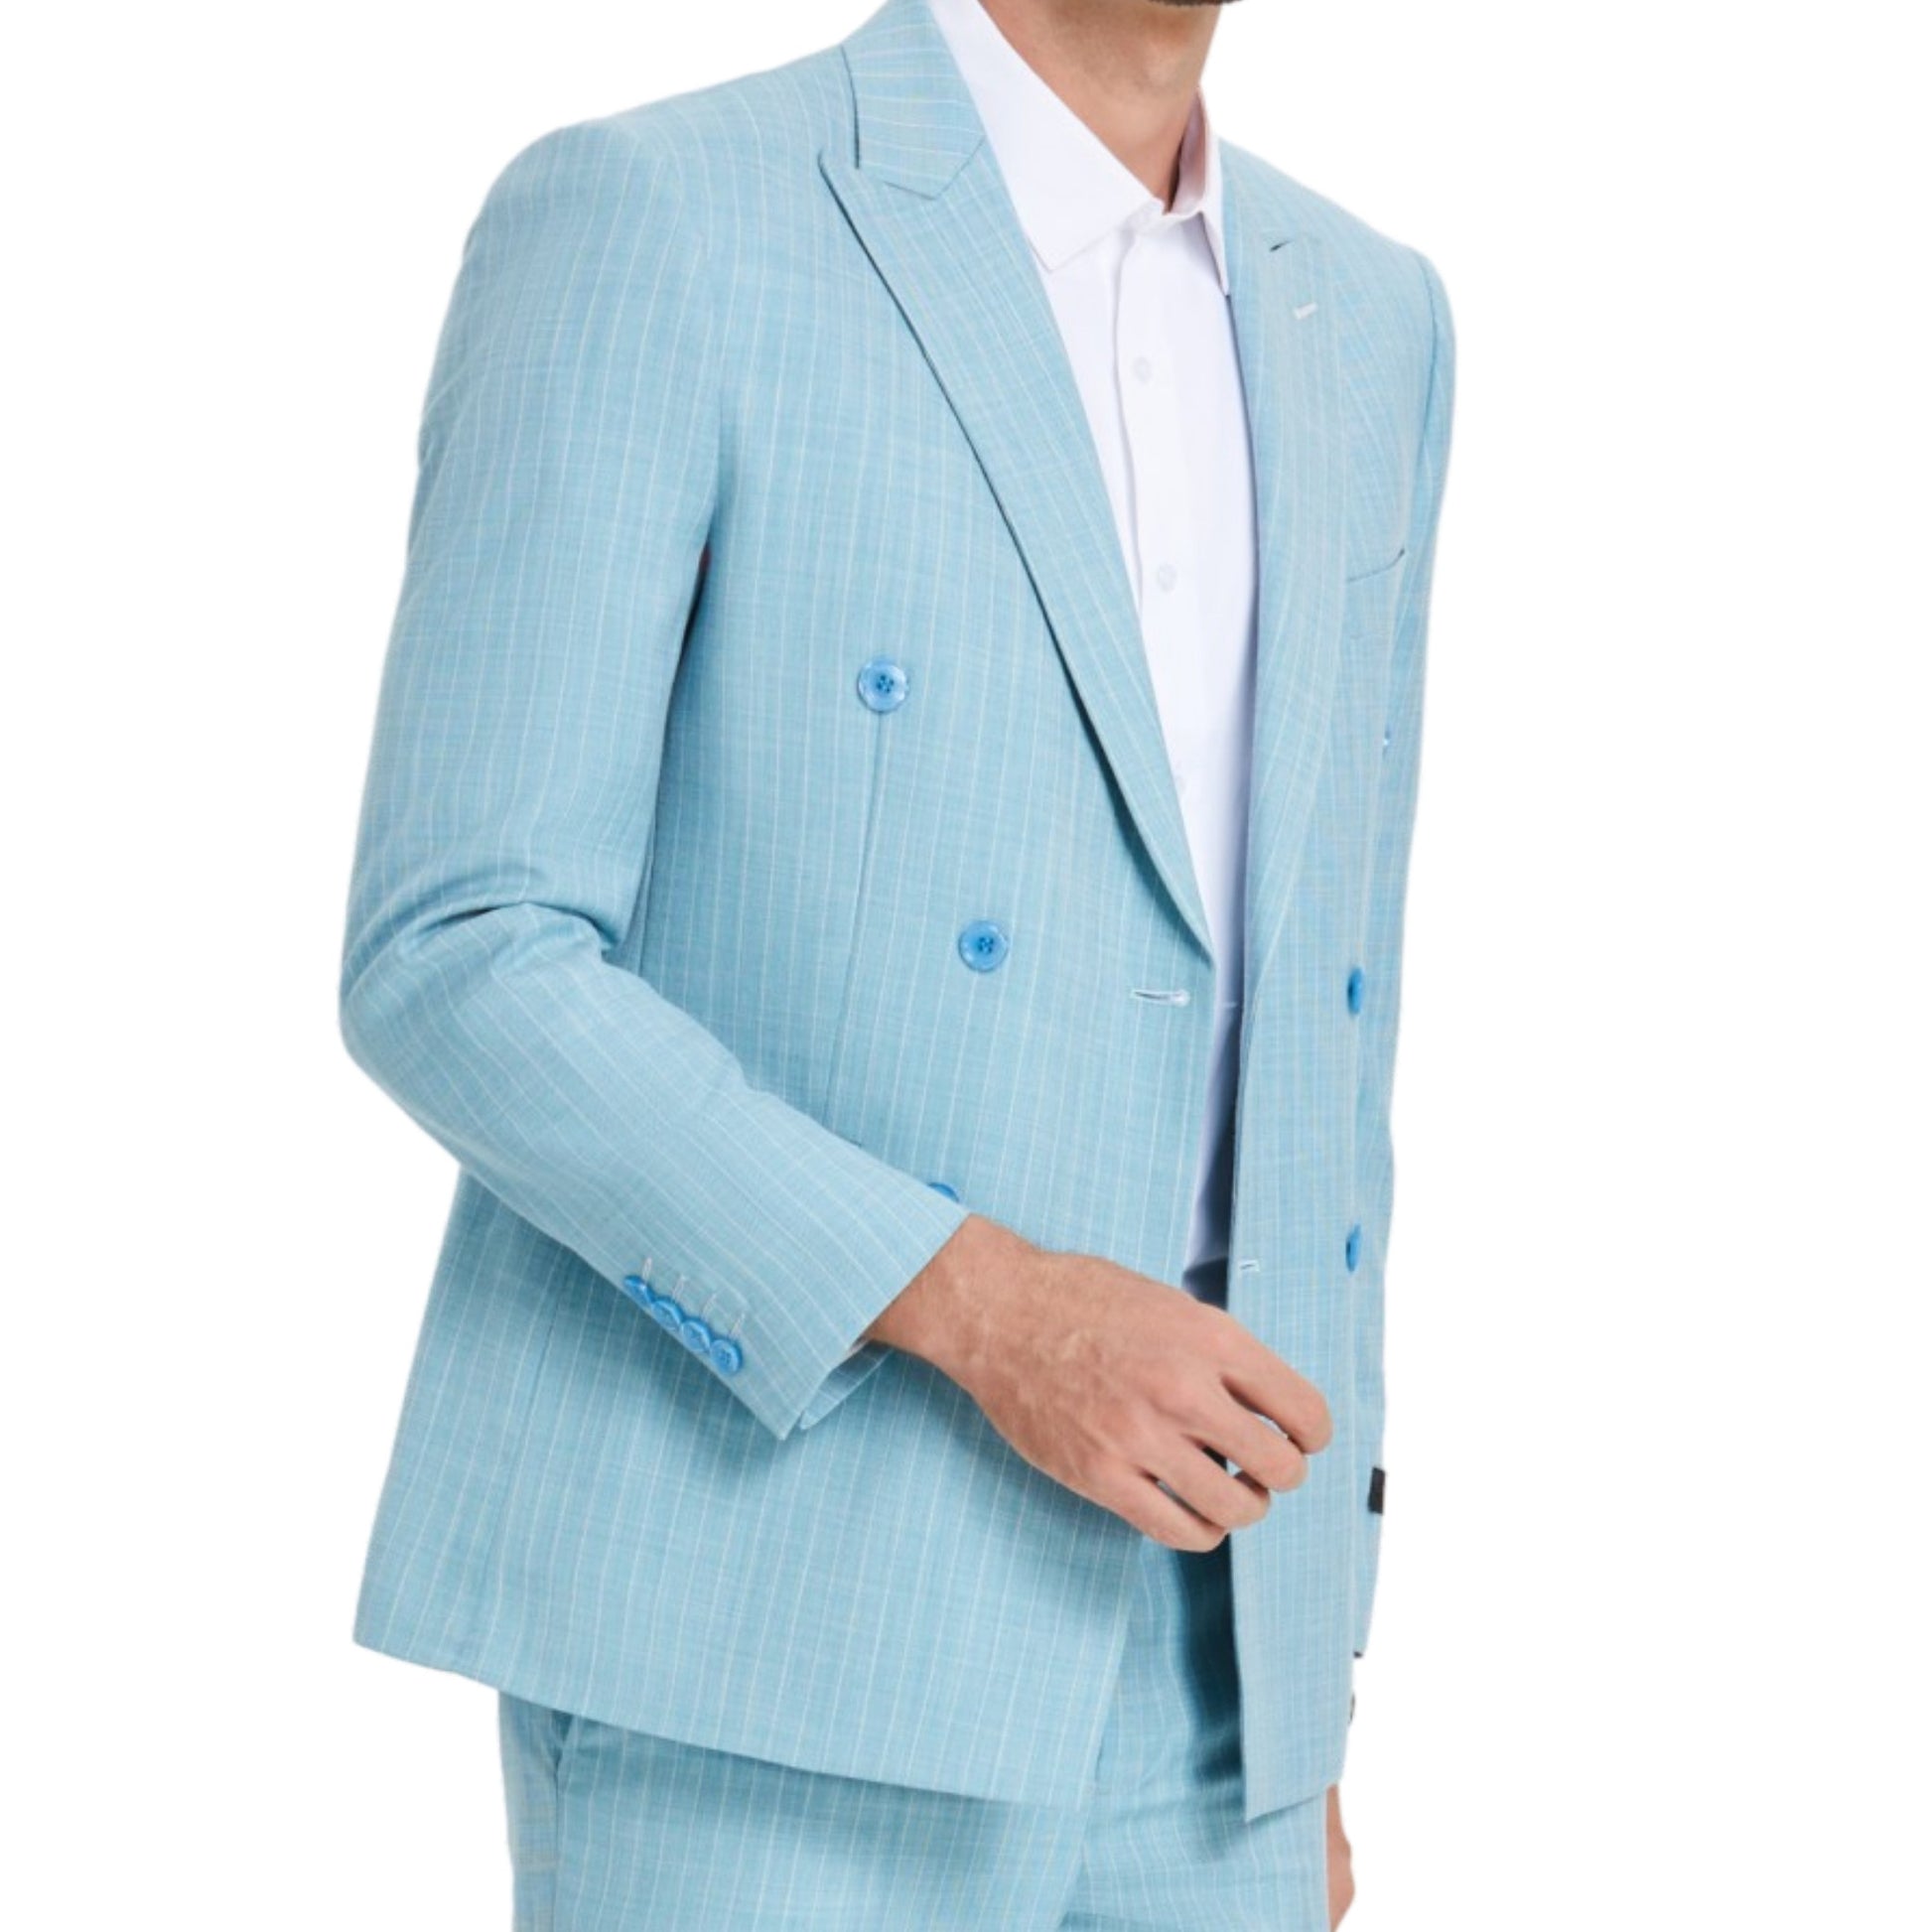 Chic KCT Menswear Light Blue Checkered Double-Breasted Suit for a sharp, summer-ready look